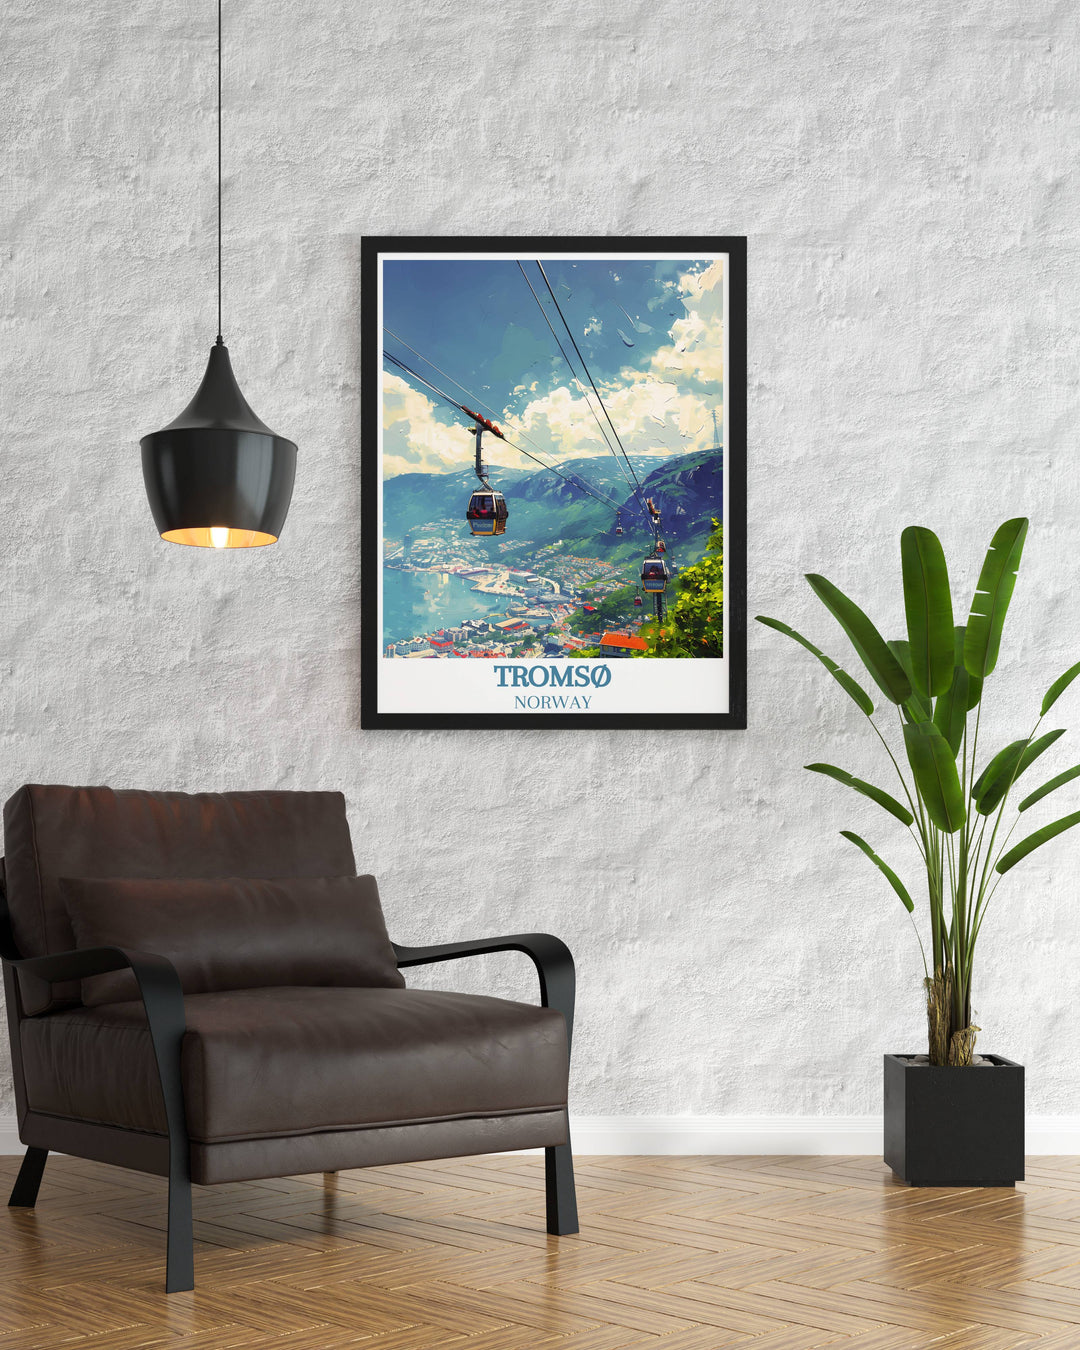 Norway canvas art featuring Tromsos Fjellheisen cable car, blending urban and natural elements to capture the essence of this enchanting Arctic town.